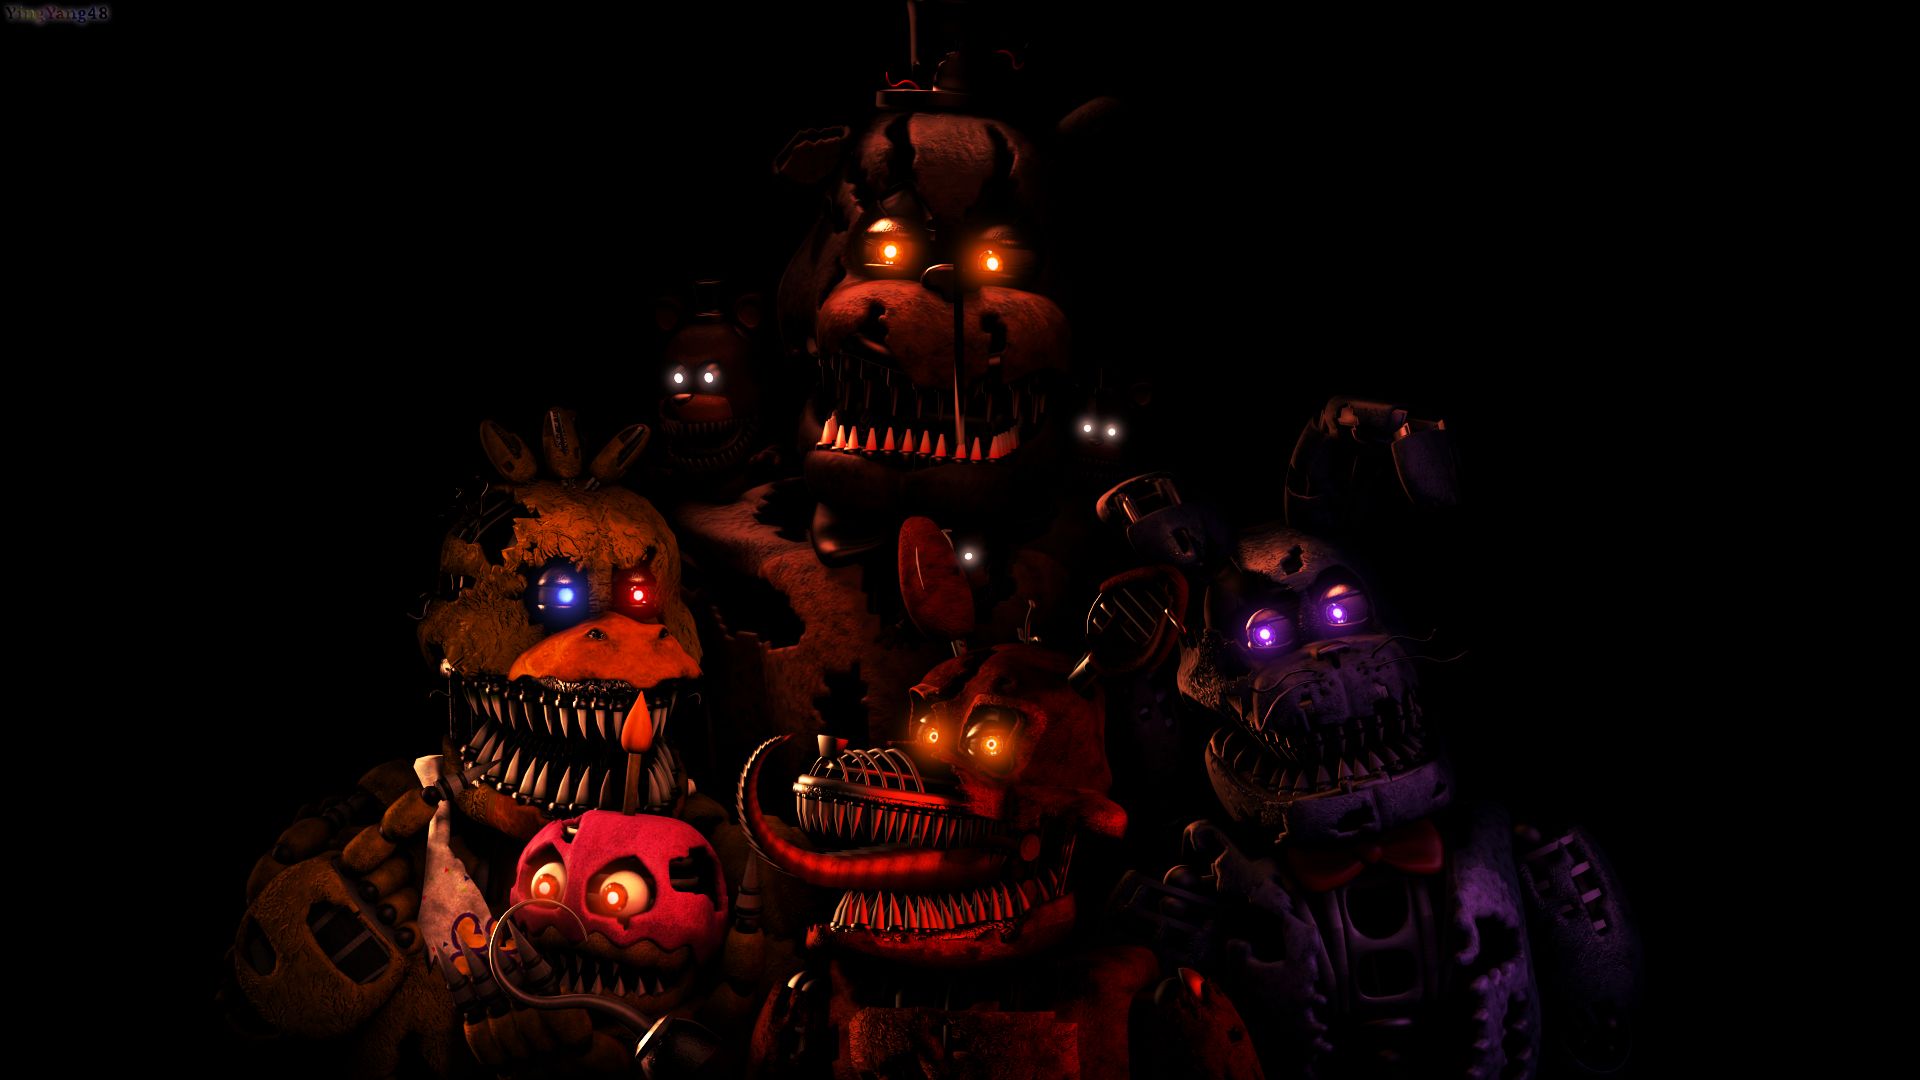 Five Nights At Freddy's 4 Wallpapers - Wallpaper Cave